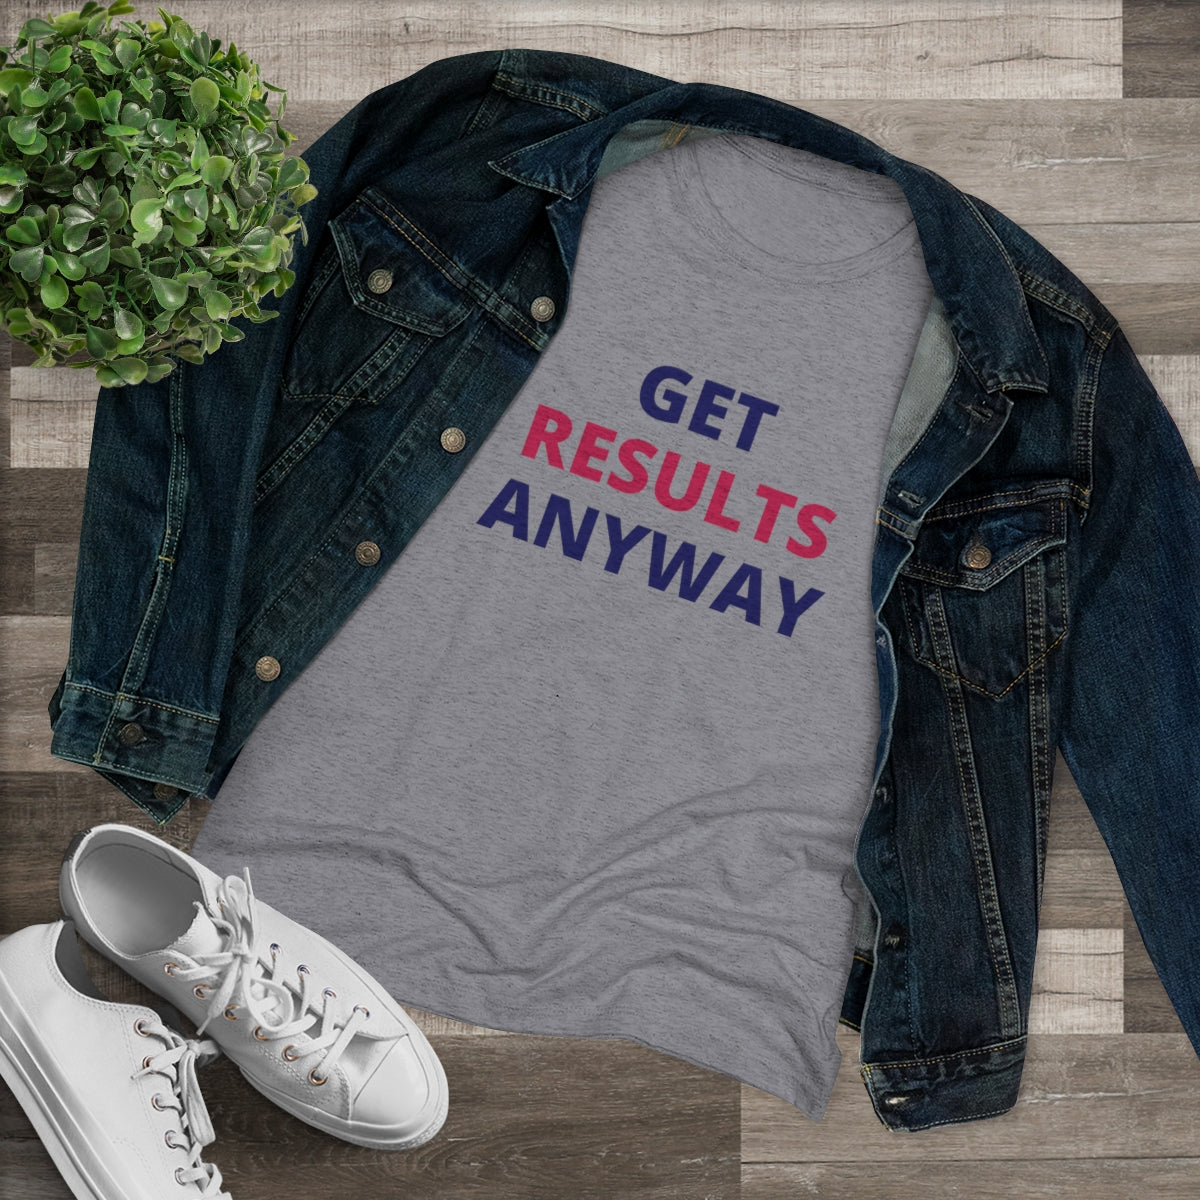 Get Results Women's Triblend Tee